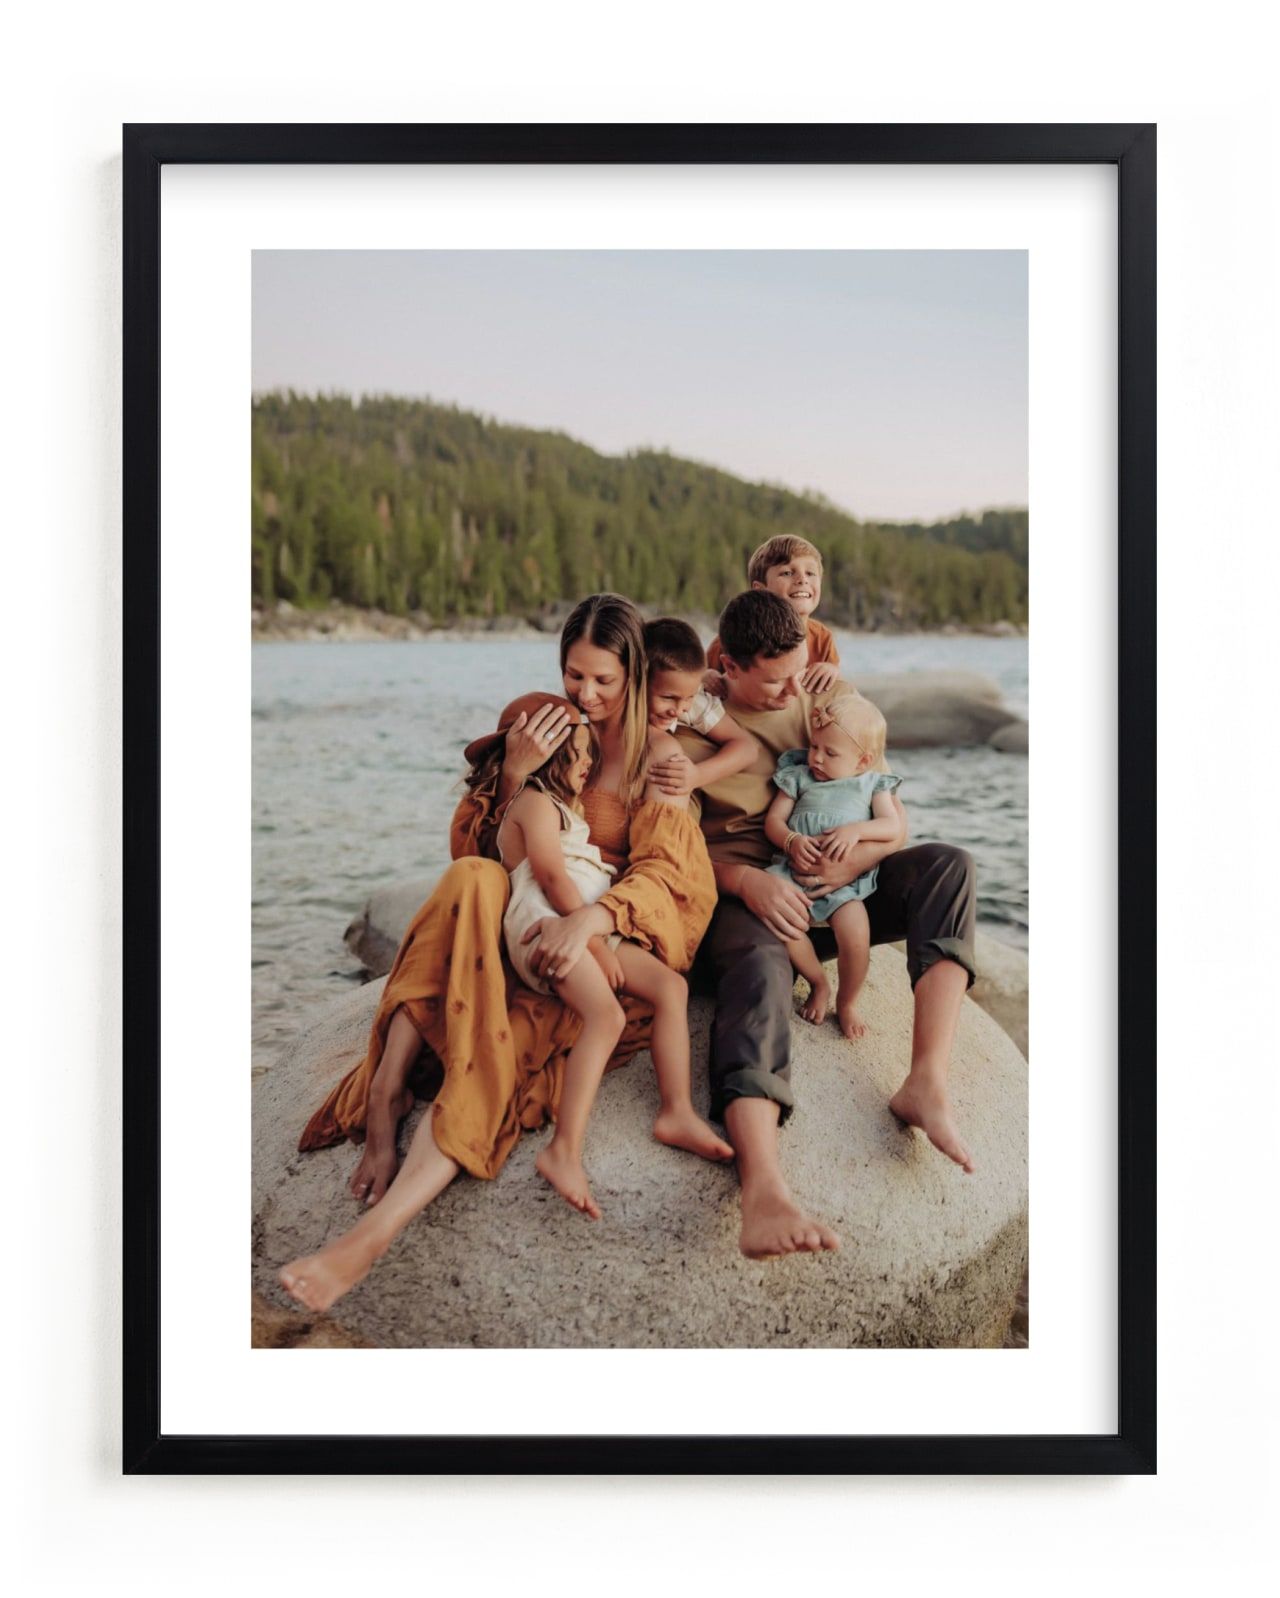 "The Big Picture" - Custom Photo Art by Minted. | Minted